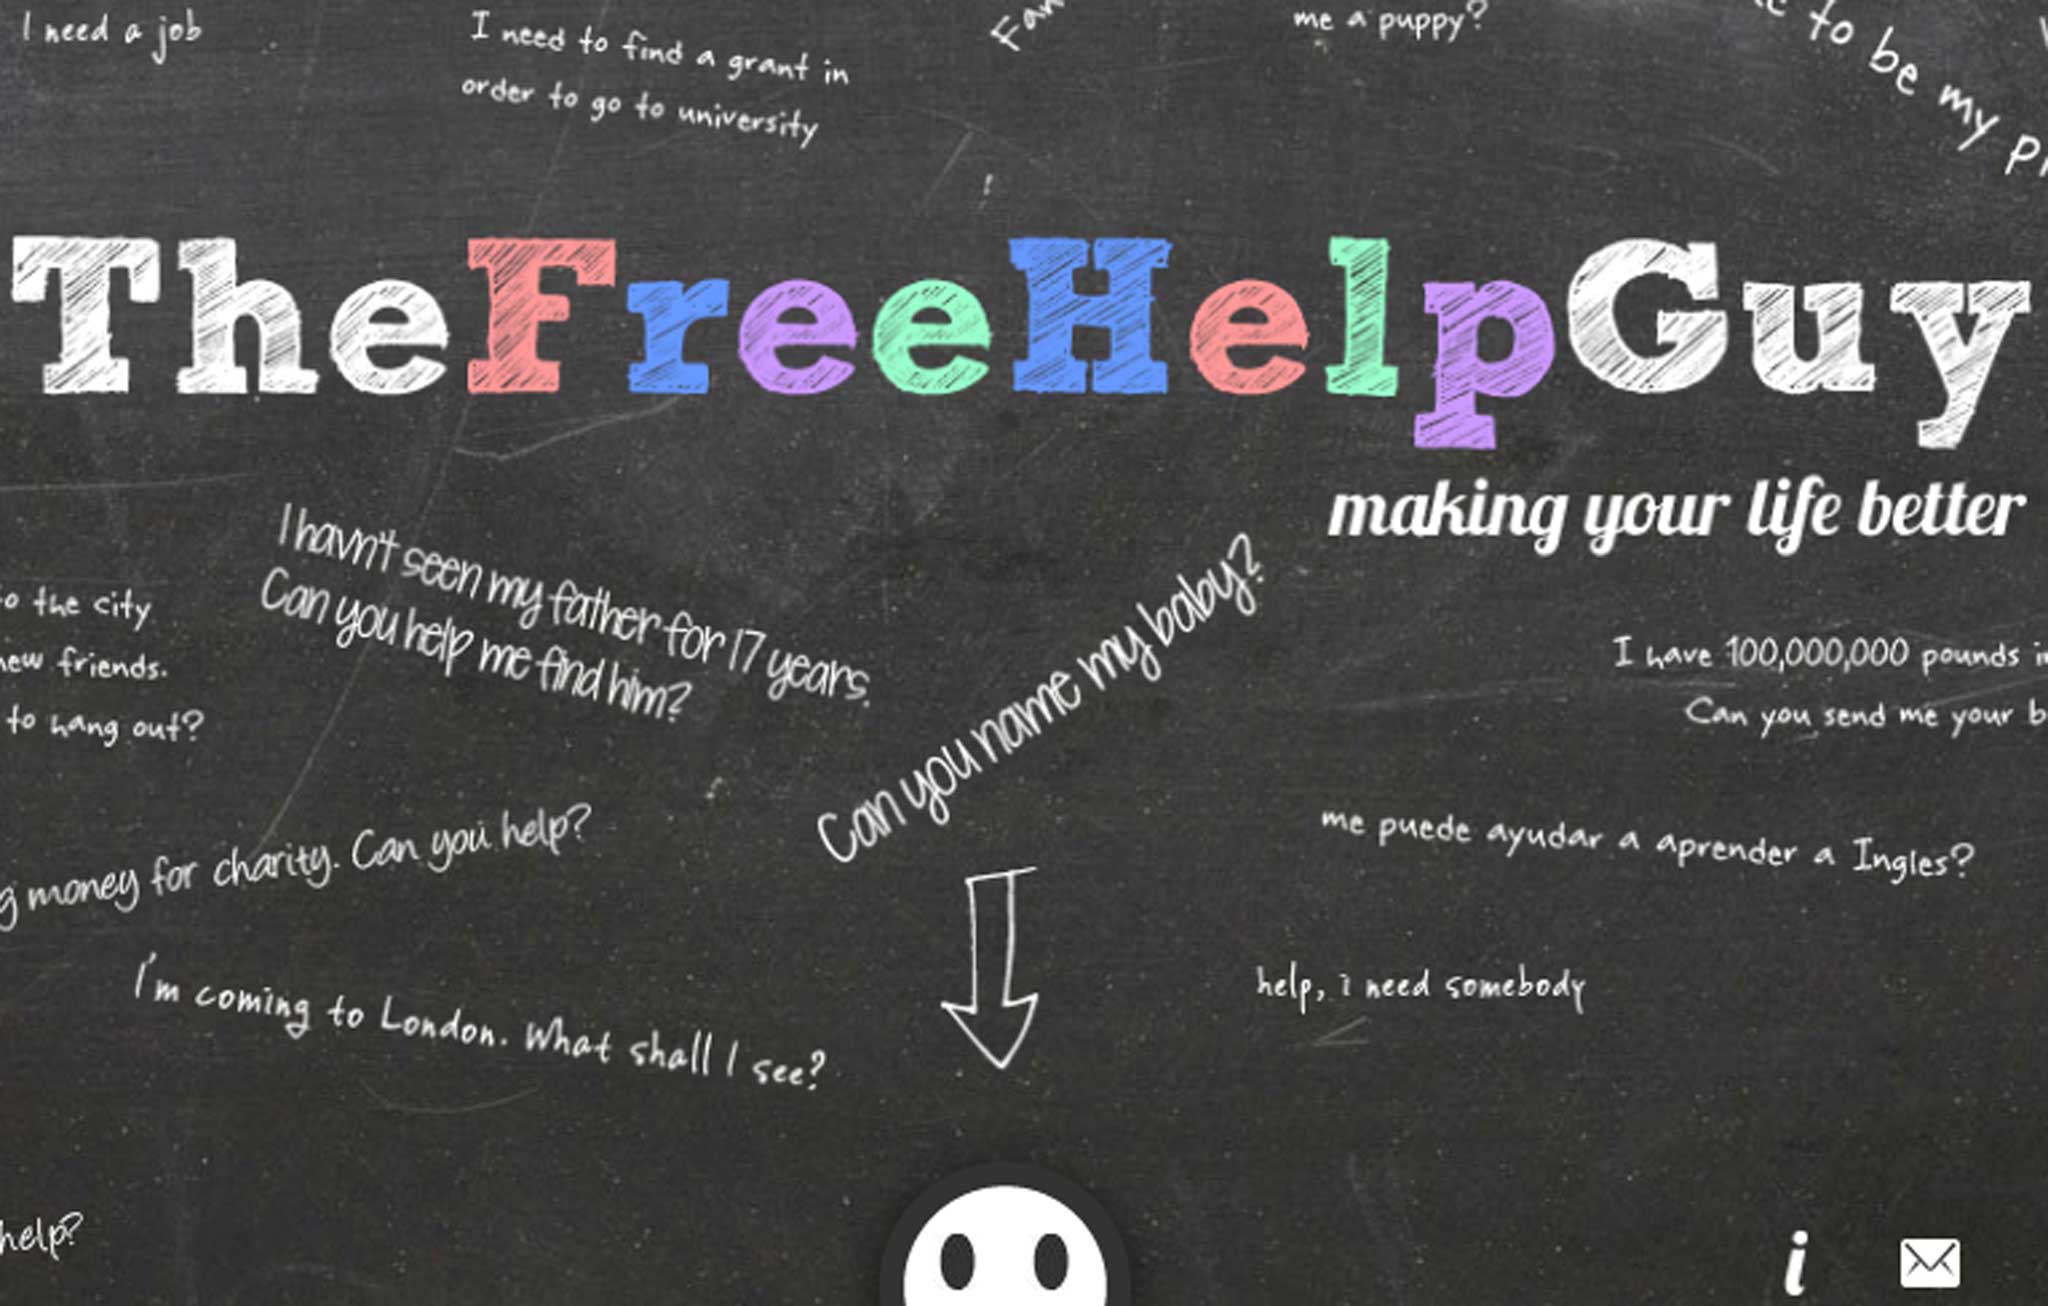 The anonymous Free Help Guy is taking a personal approach to giving